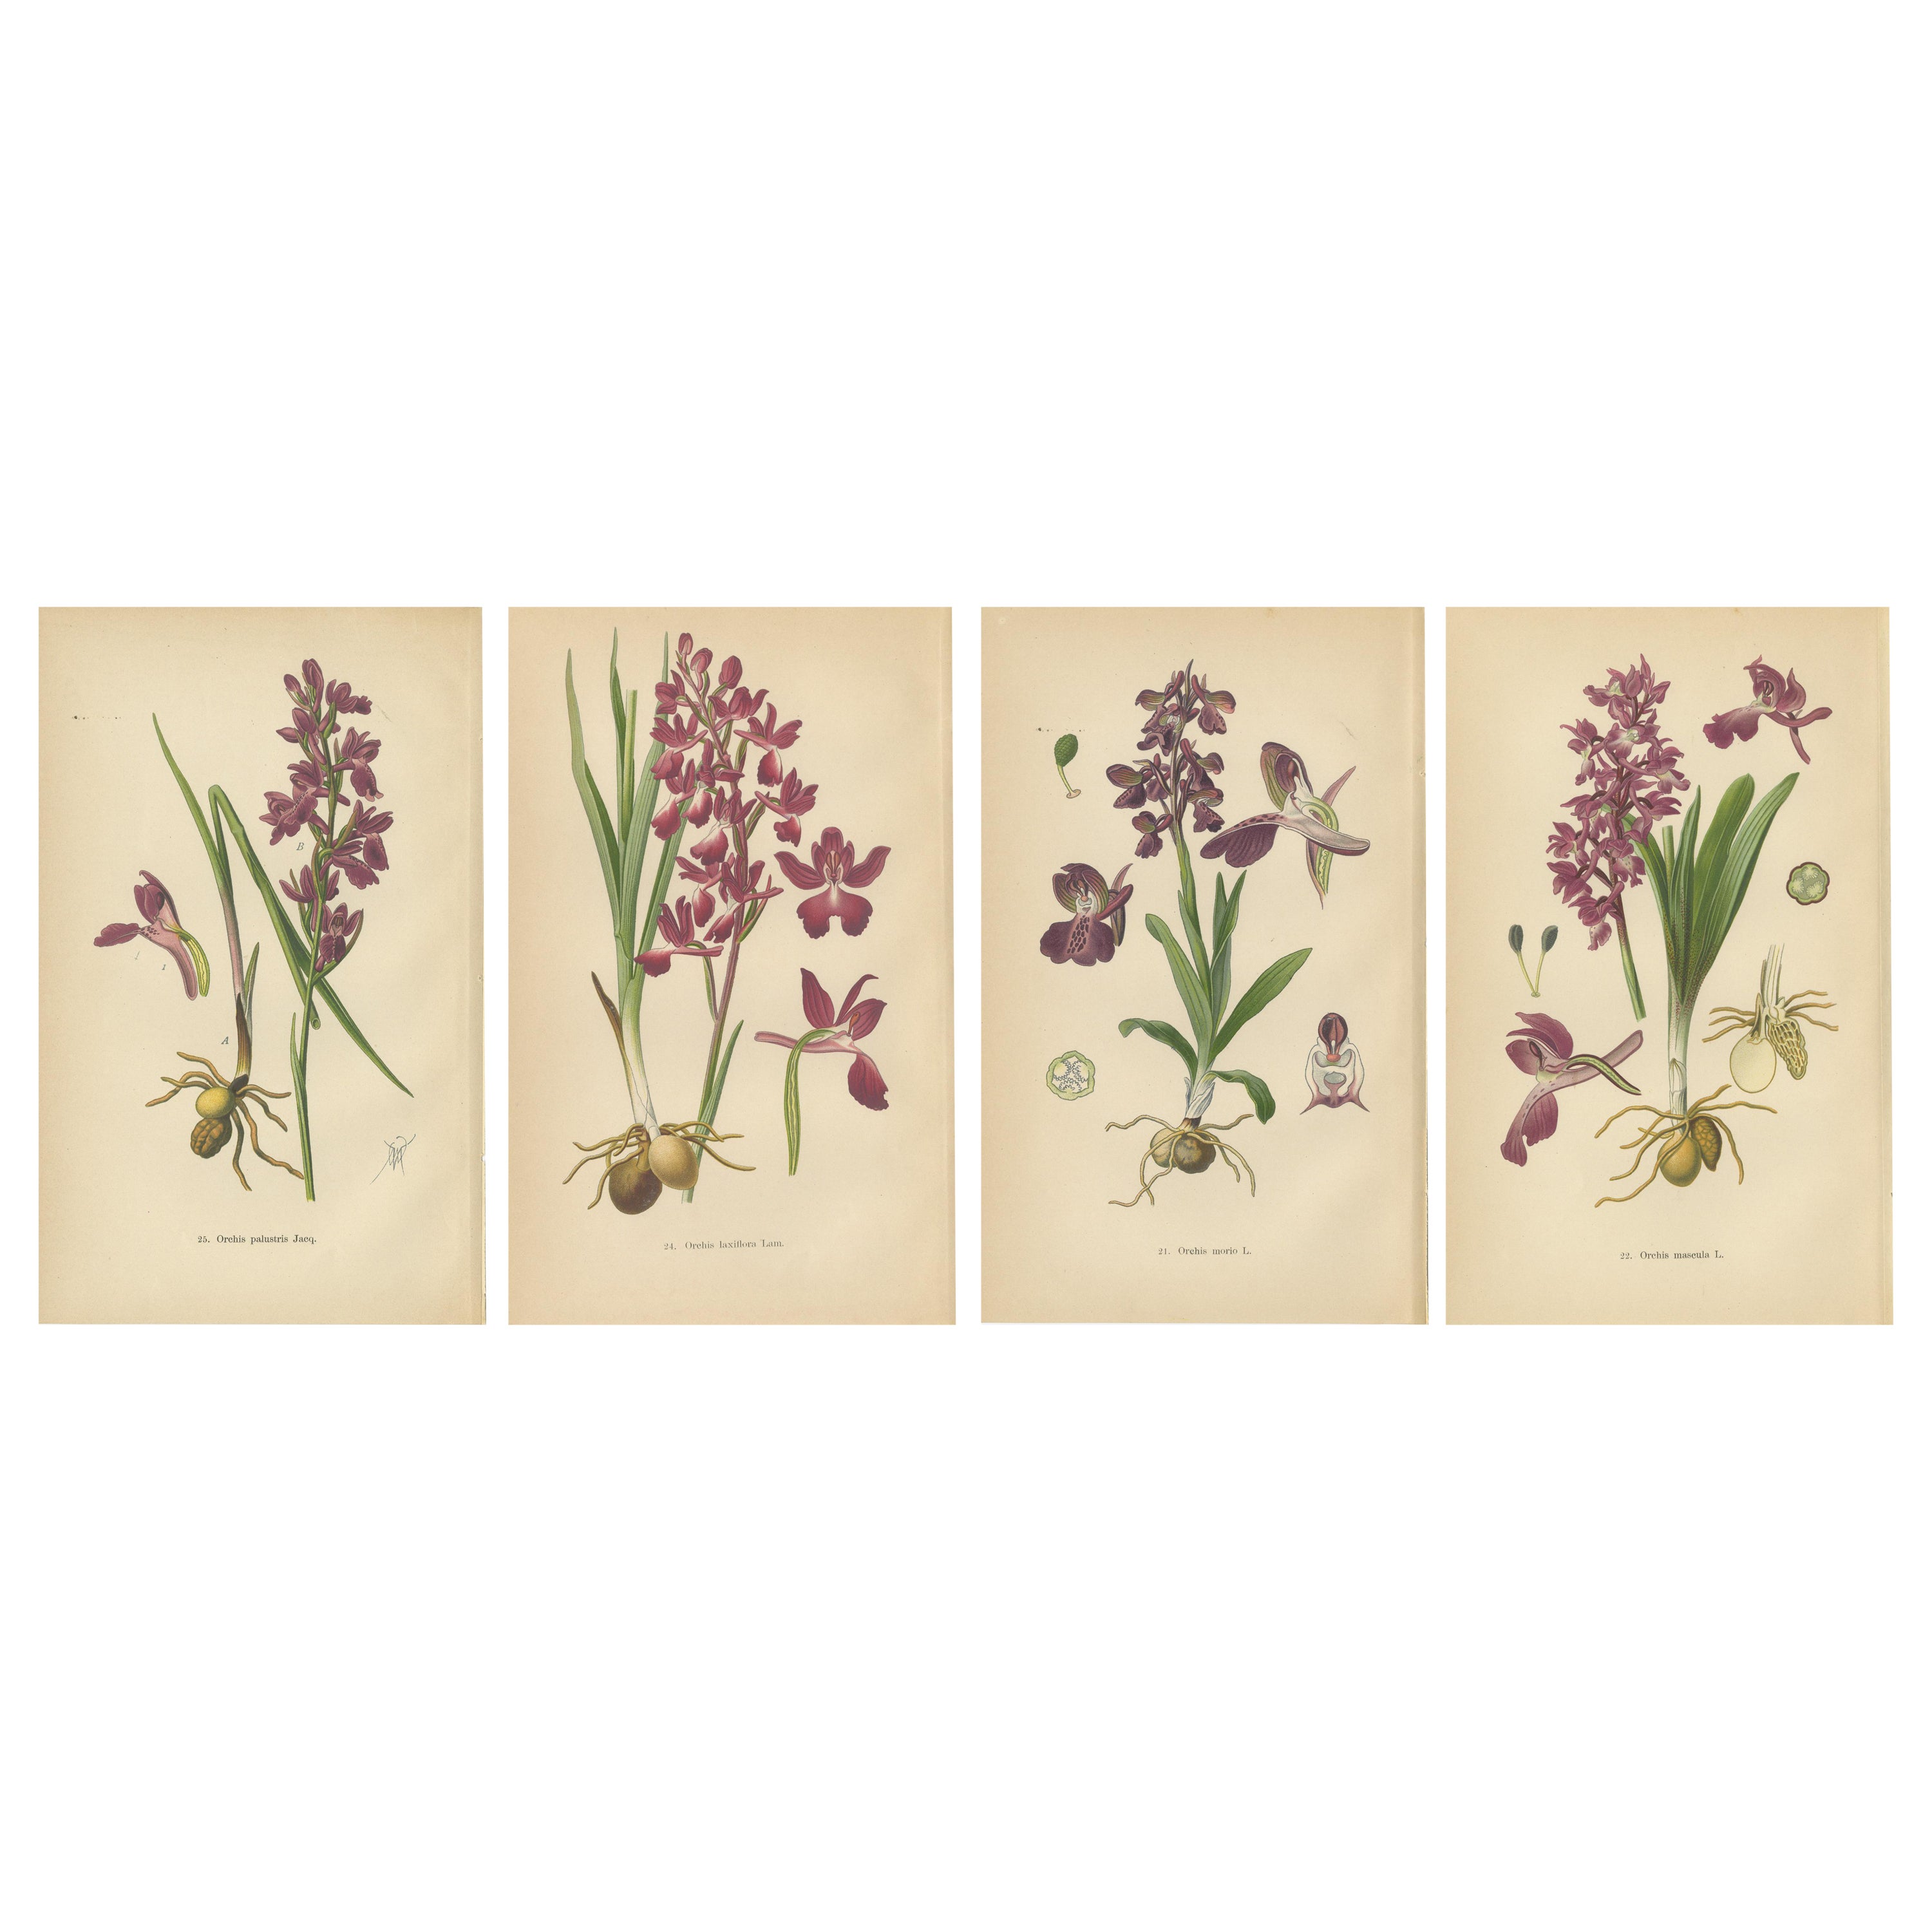 German Meadow Orchids: A Heritage of Botanical Artistry, 1904